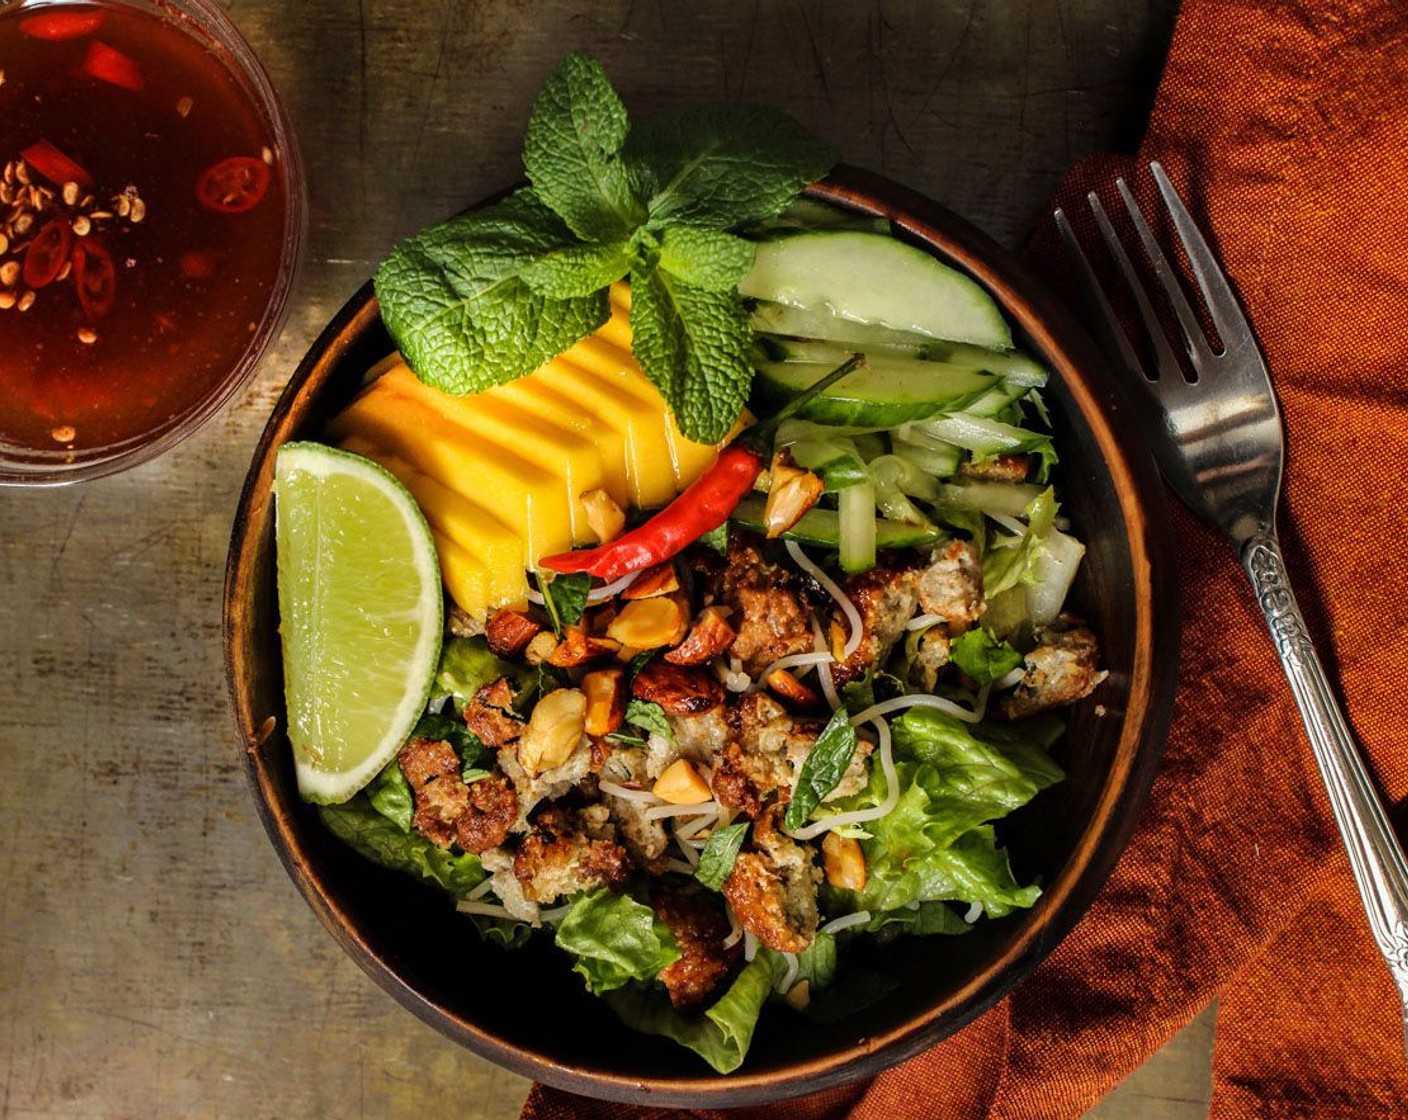 step 10 As a Salad – Chop up any type of green lettuce and top it with chopped vermicelli, bean sprouts or any type of fresh vegetables and fruits like mango. Serve with crushed nuts for some crunch and a light vinaigrette dressing such as Nuoc Cham (sweet, sour and salty fish sauce dressing).